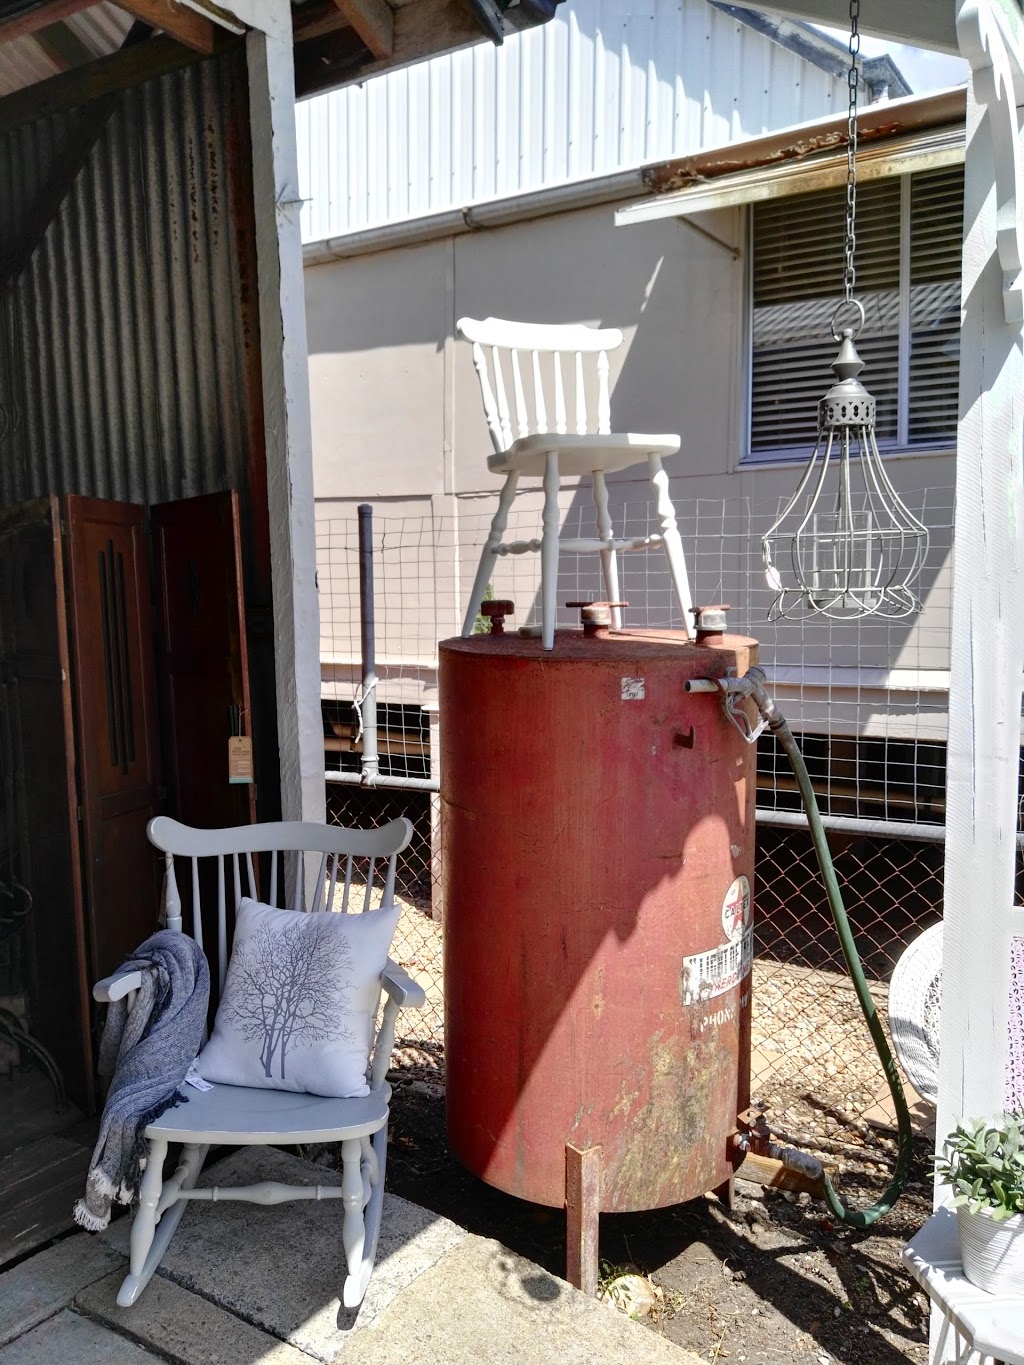 Old Favourites | home goods store | 227 Rainbow St, Sandgate QLD 4017, Australia | 0401155995 OR +61 401 155 995